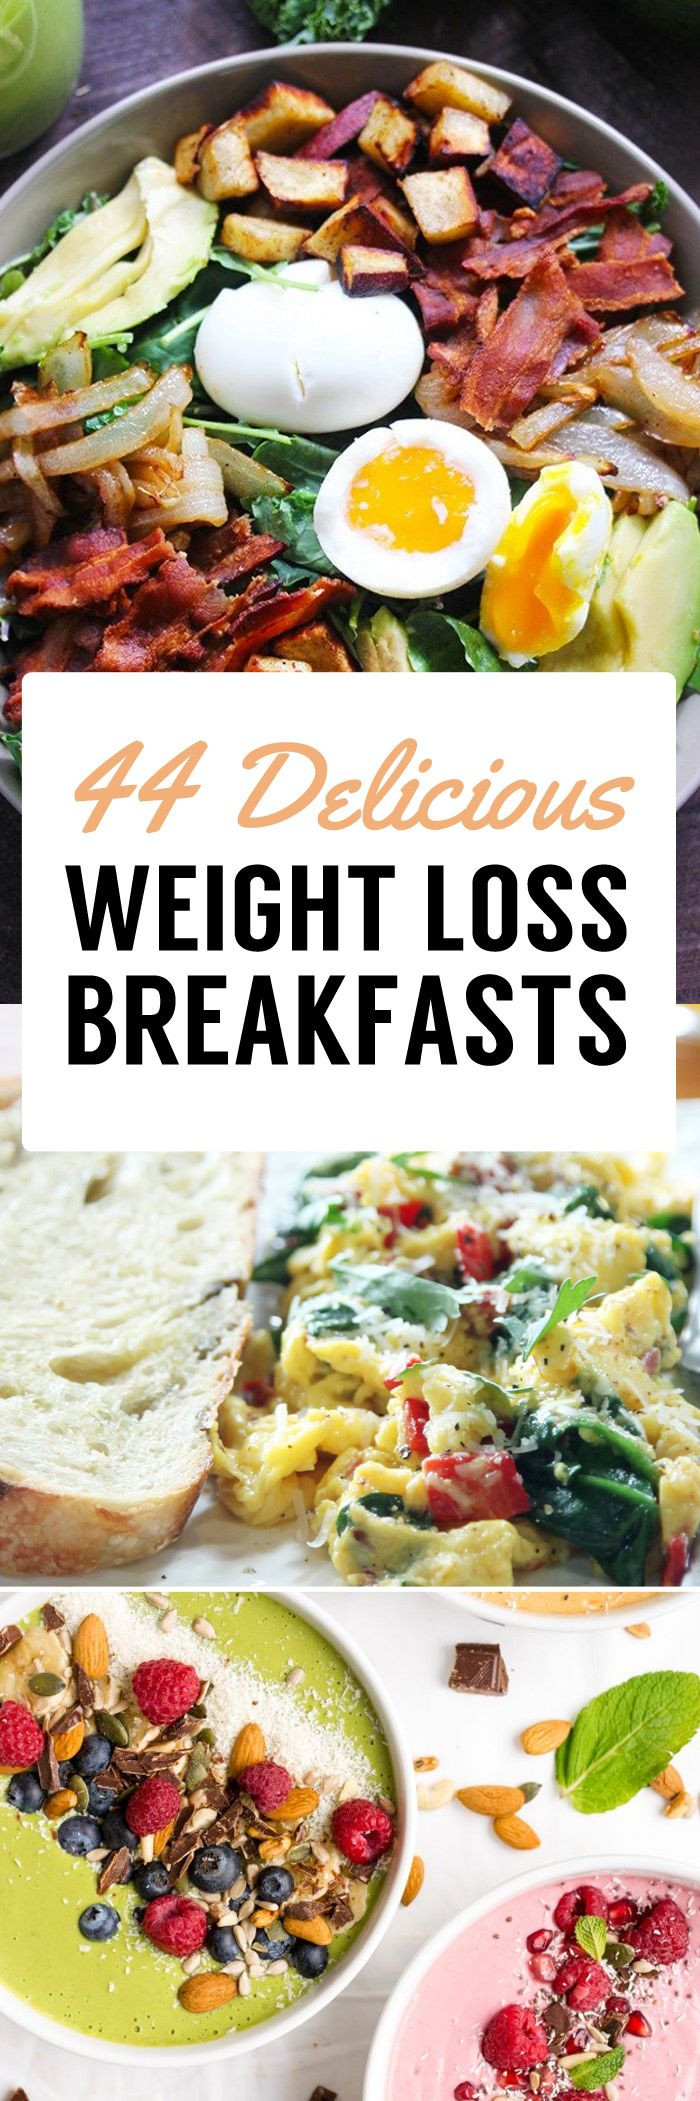 Healthy Breakfast For Weight Loss
 The 25 best Weight loss meals ideas on Pinterest